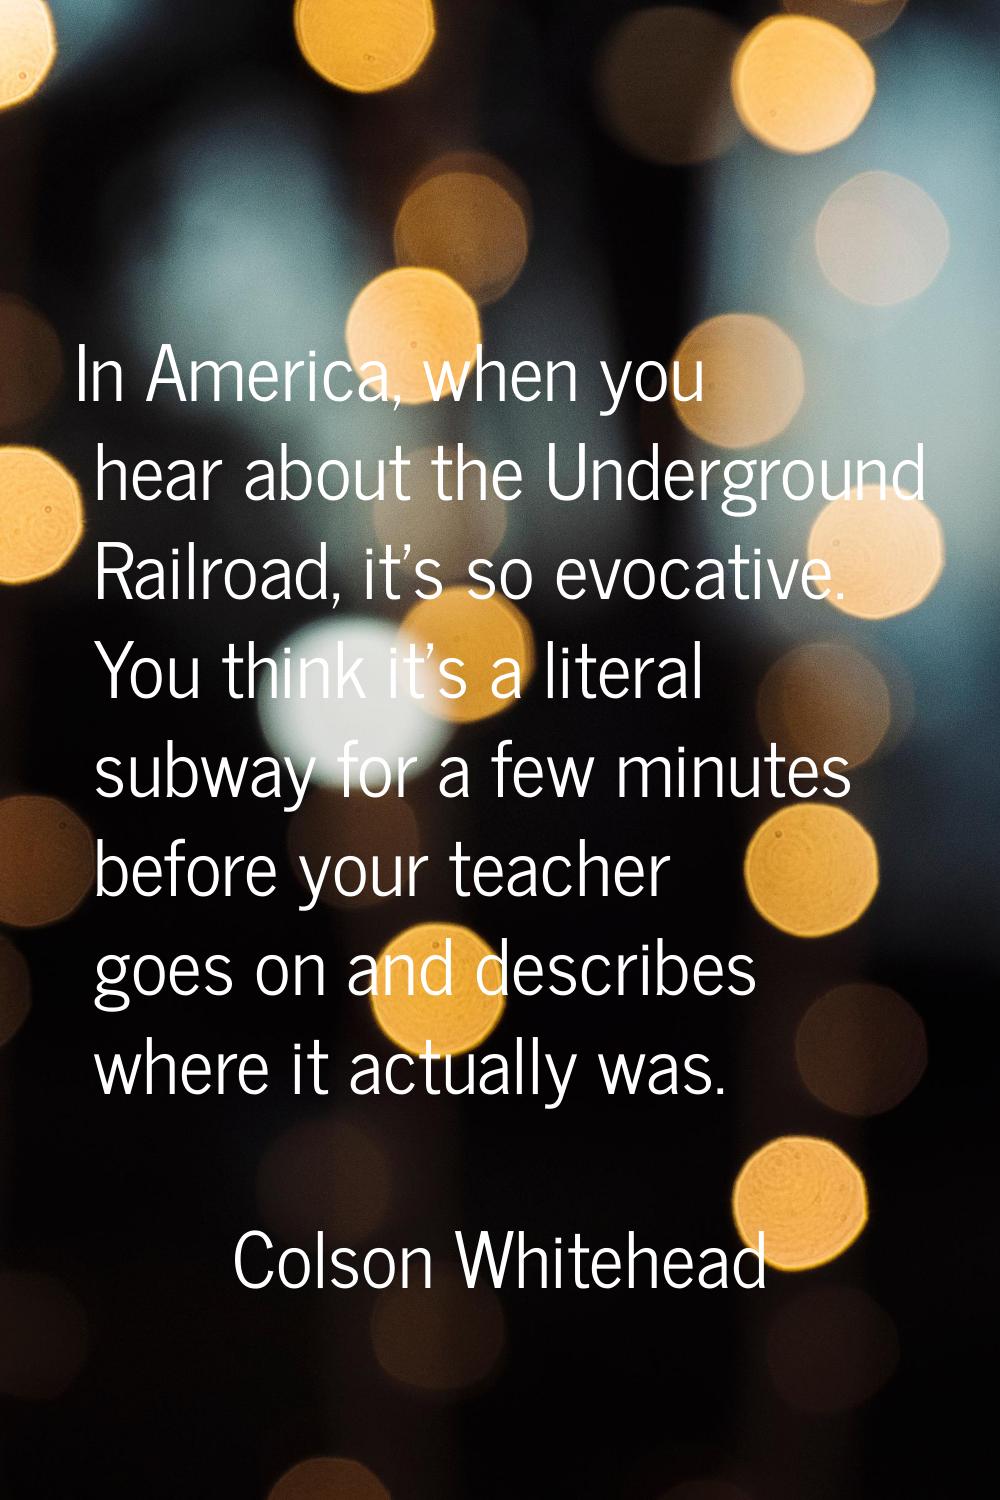 In America, when you hear about the Underground Railroad, it's so evocative. You think it's a liter